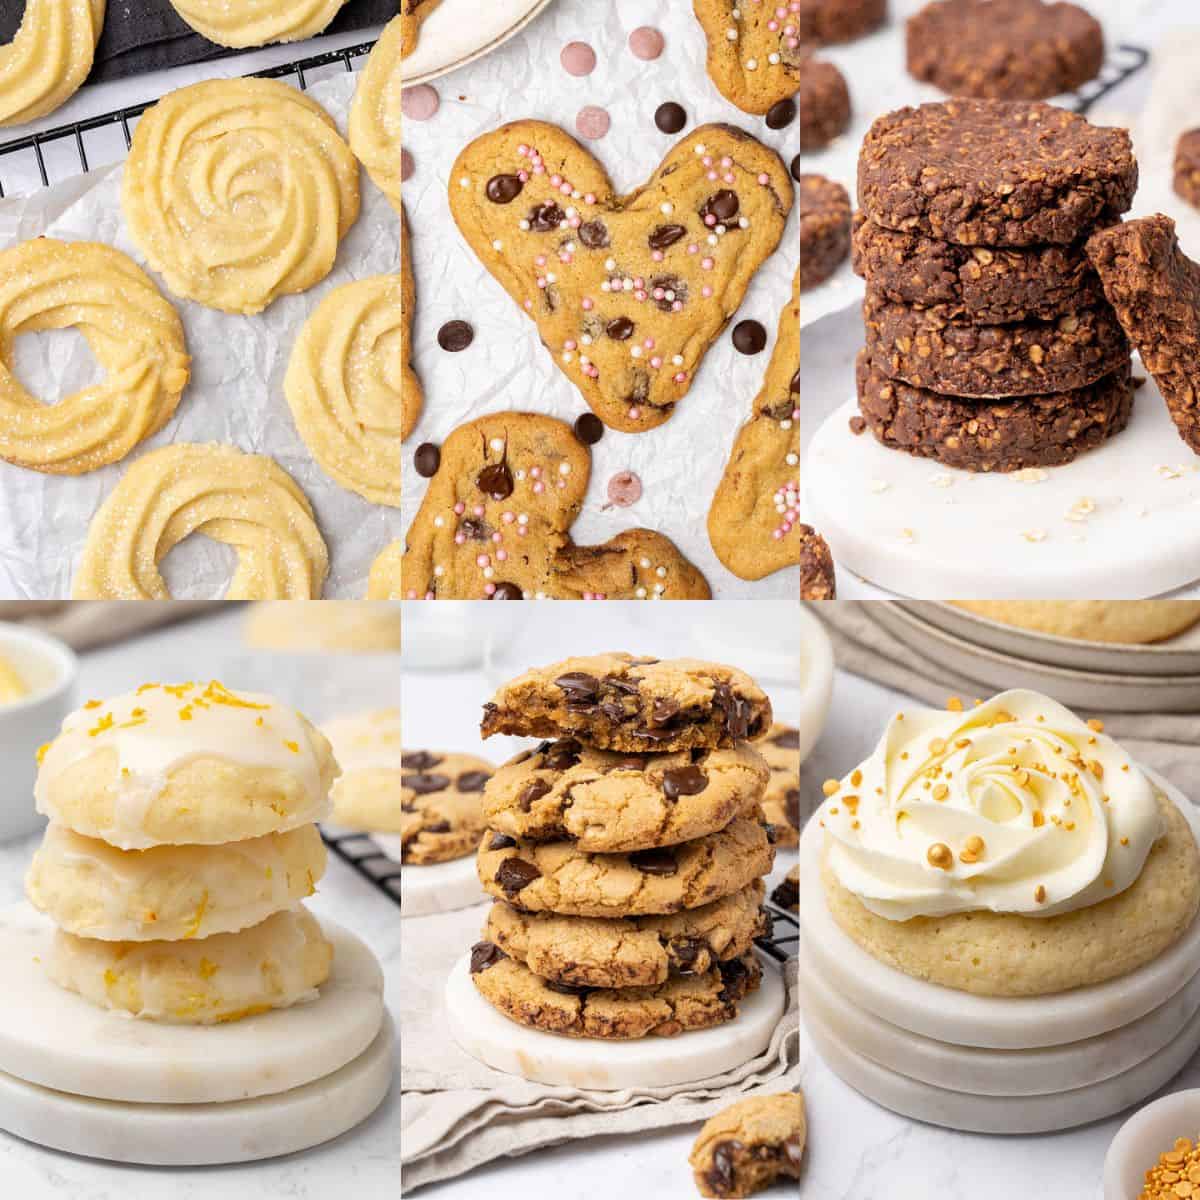 <p>All the<strong> <a href="https://www.spatuladesserts.com/types-of-cookies/">different types of cookies</a></strong> with pictures in one place! Whether you prefer chocolate chip, oatmeal, drop, thumbprint, or icebox, consider this the ultimate guide to different types of cookies.</p> <p><strong>Go to the recipes: <a href="https://www.spatuladesserts.com/types-of-cookies/">Different Types of Cookies</a></strong></p>